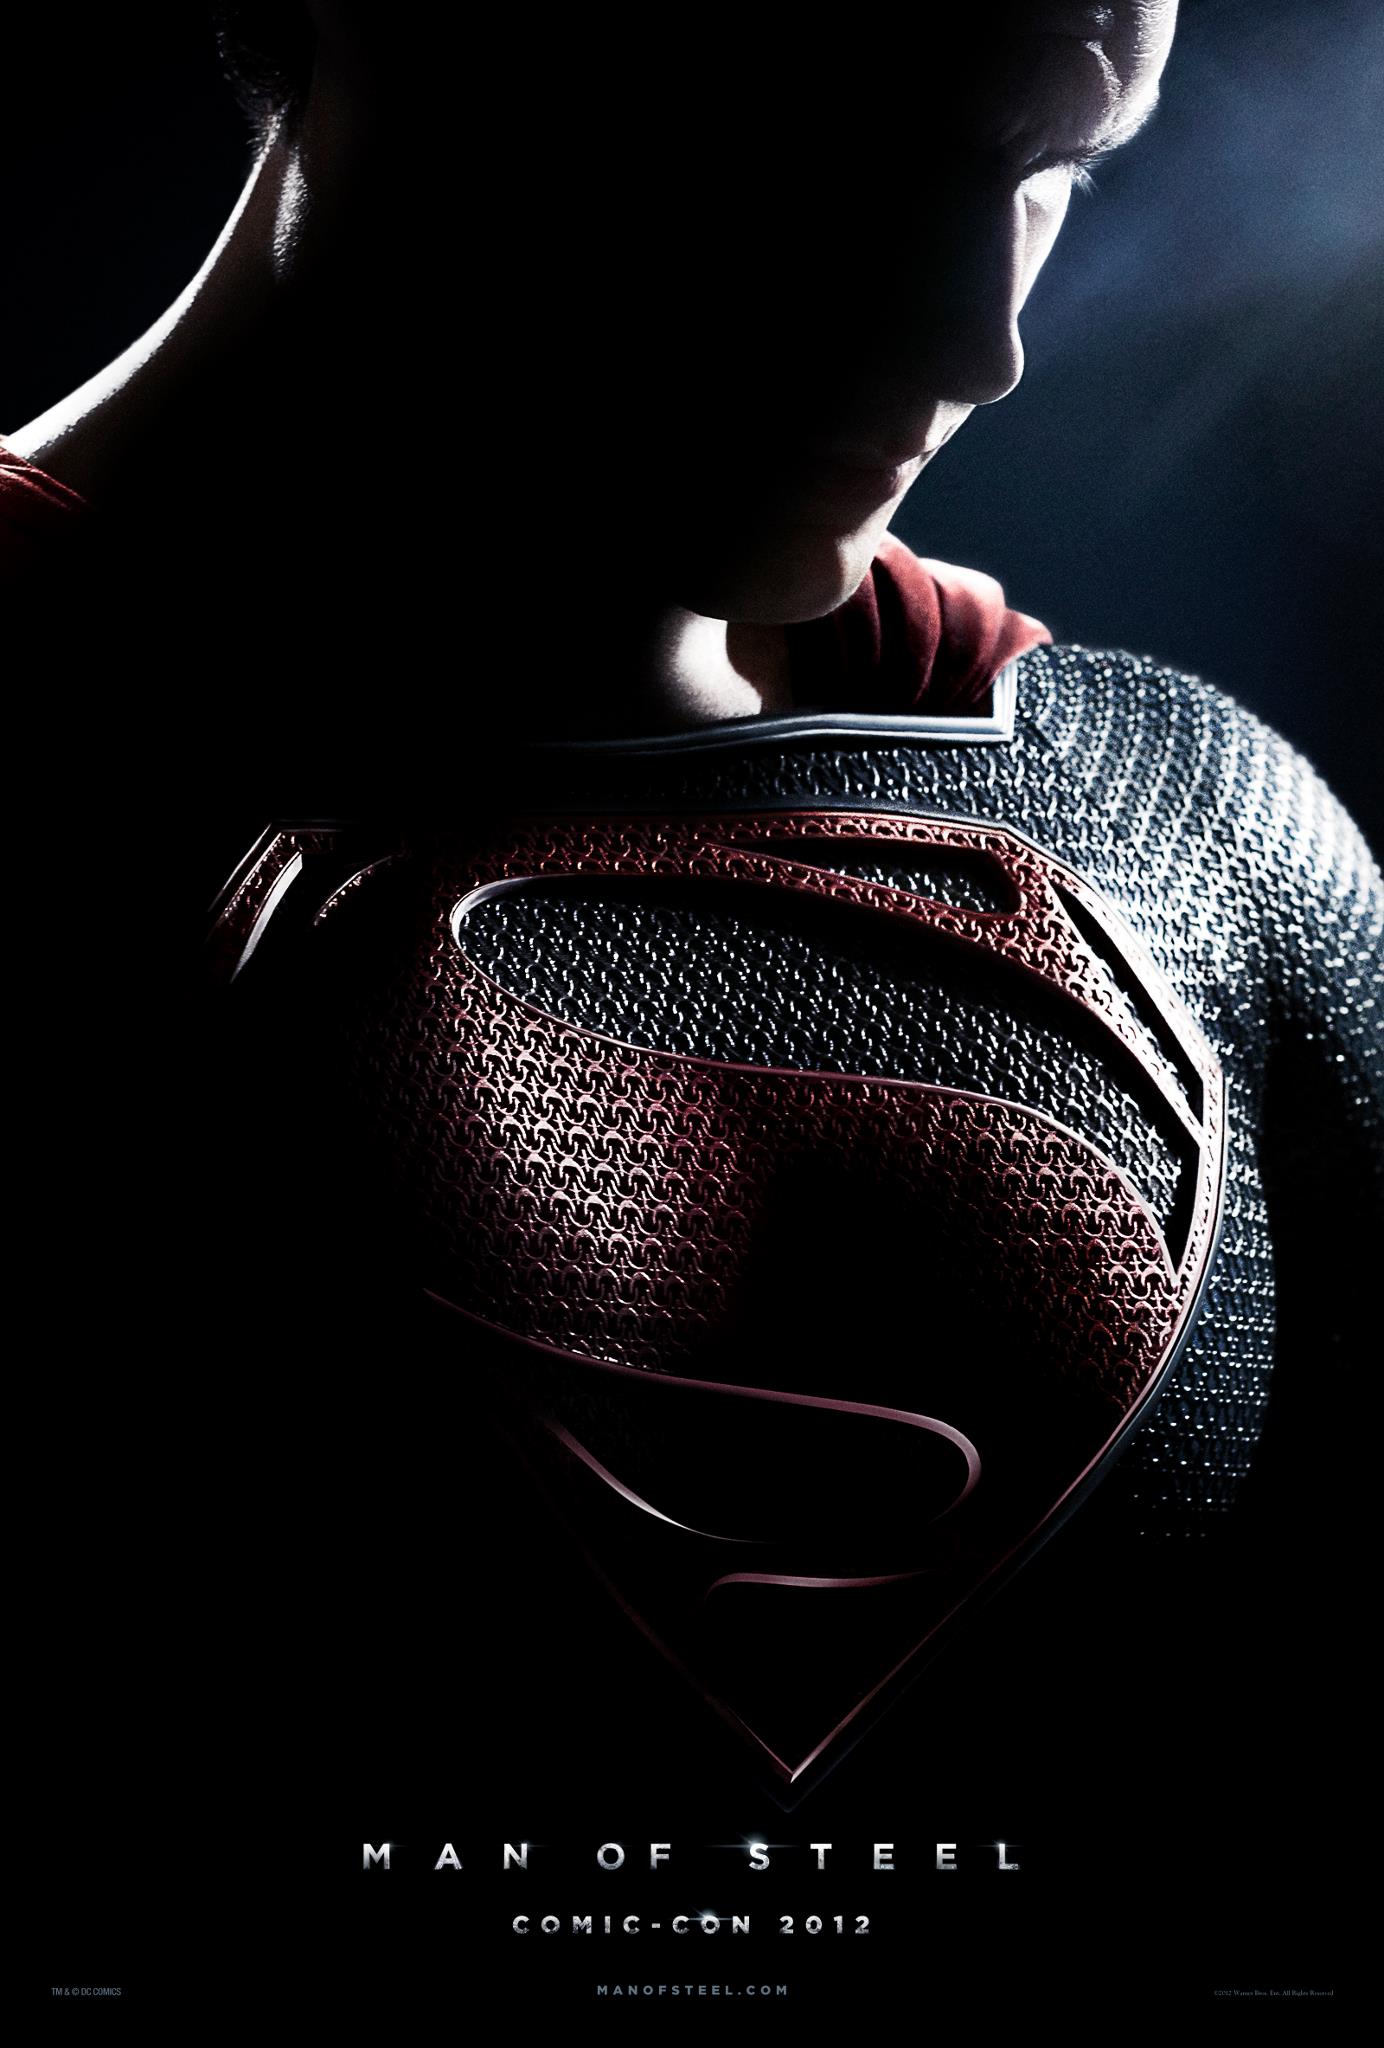 First Teaser Poster For Zack Snyder's 'Man of Steel' Featuring Henry Cavill1384 x 2048